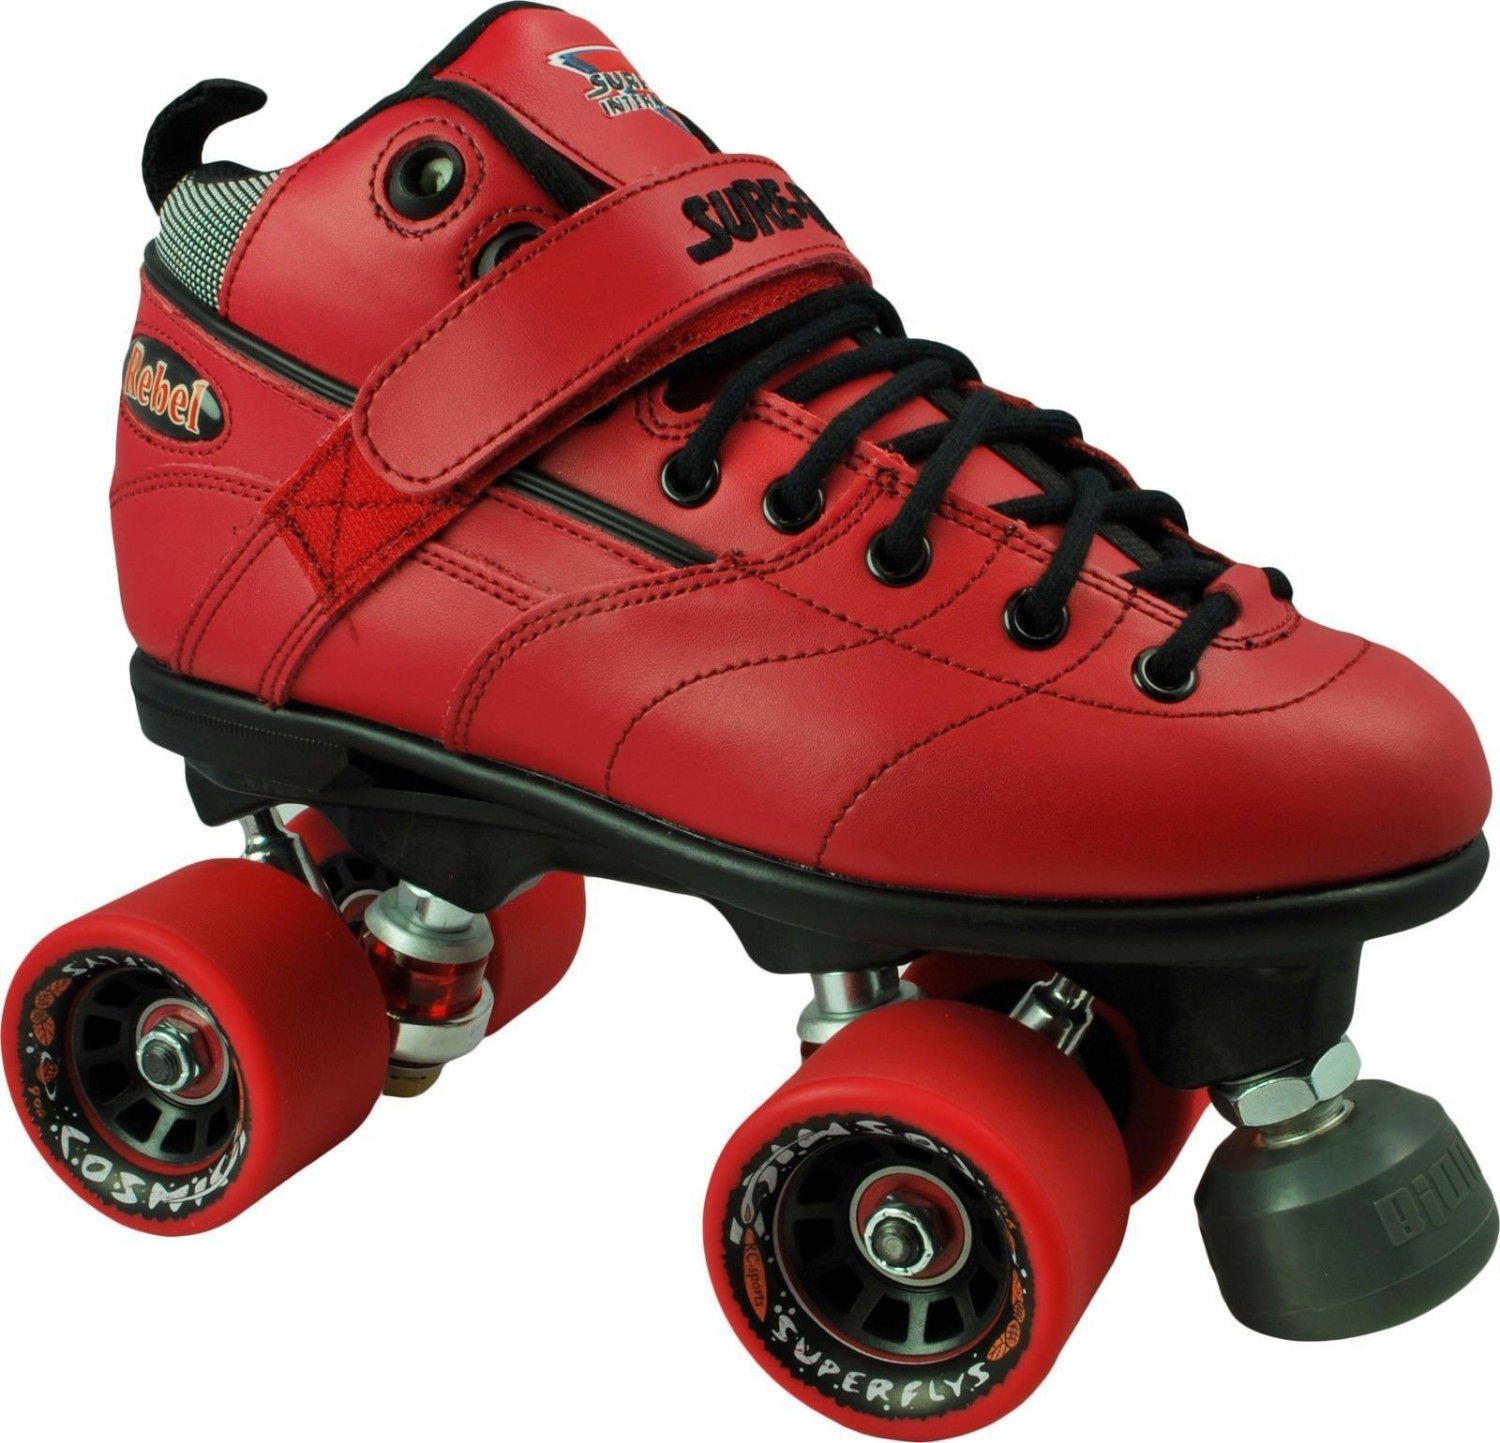 Sure Grip Rebel Eagle Cosmic Superfly derby roller skates NEW! All sizes